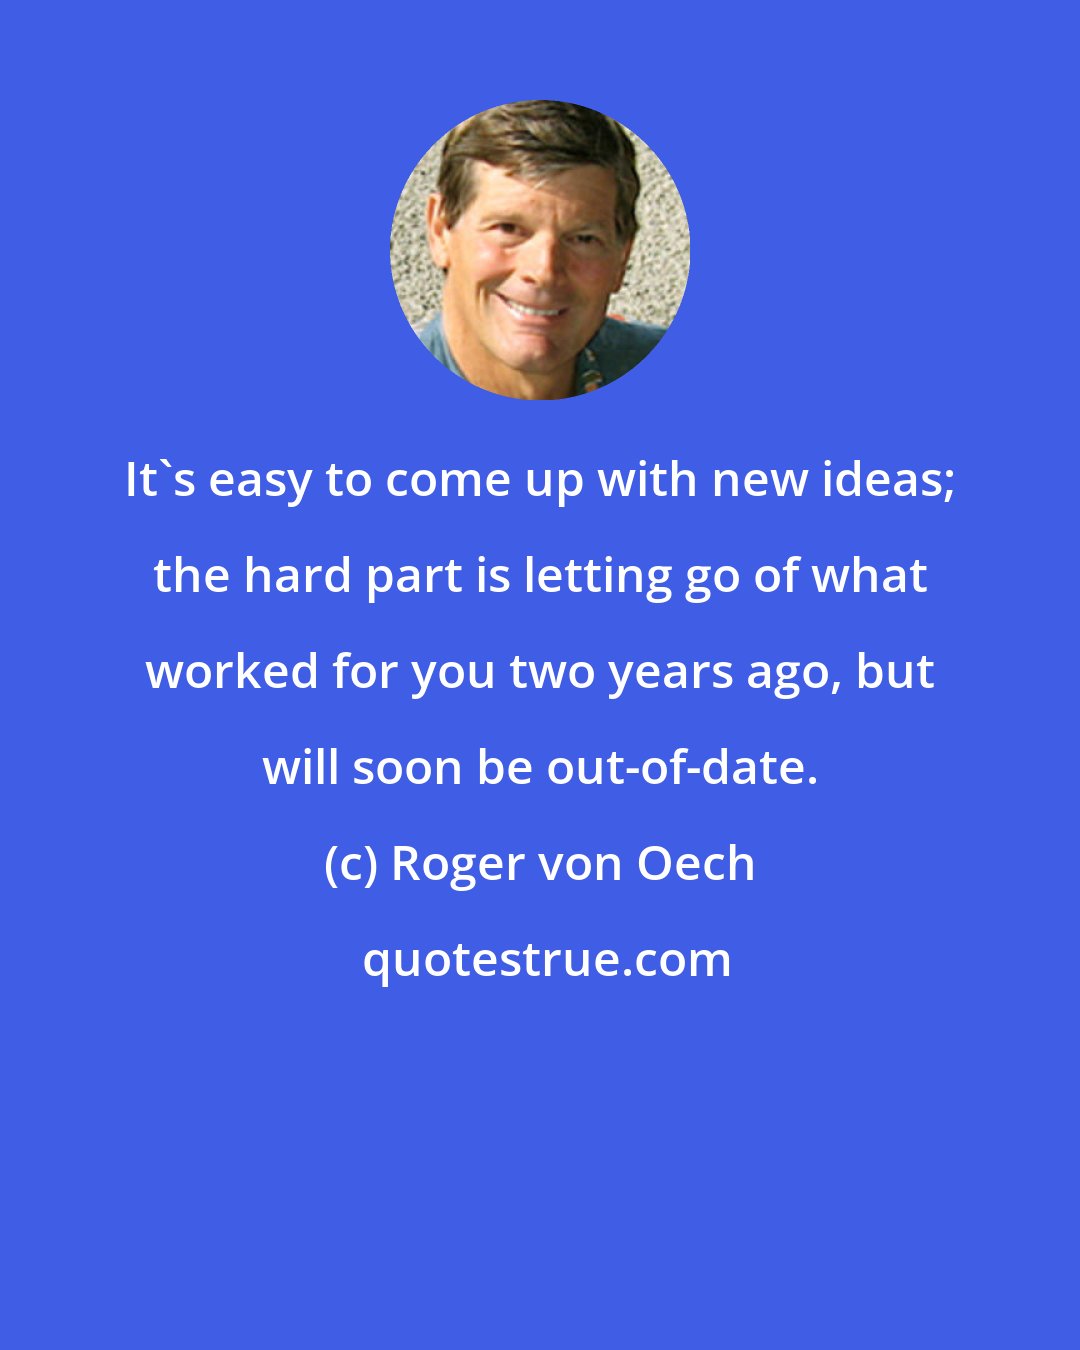 Roger von Oech: It's easy to come up with new ideas; the hard part is letting go of what worked for you two years ago, but will soon be out-of-date.